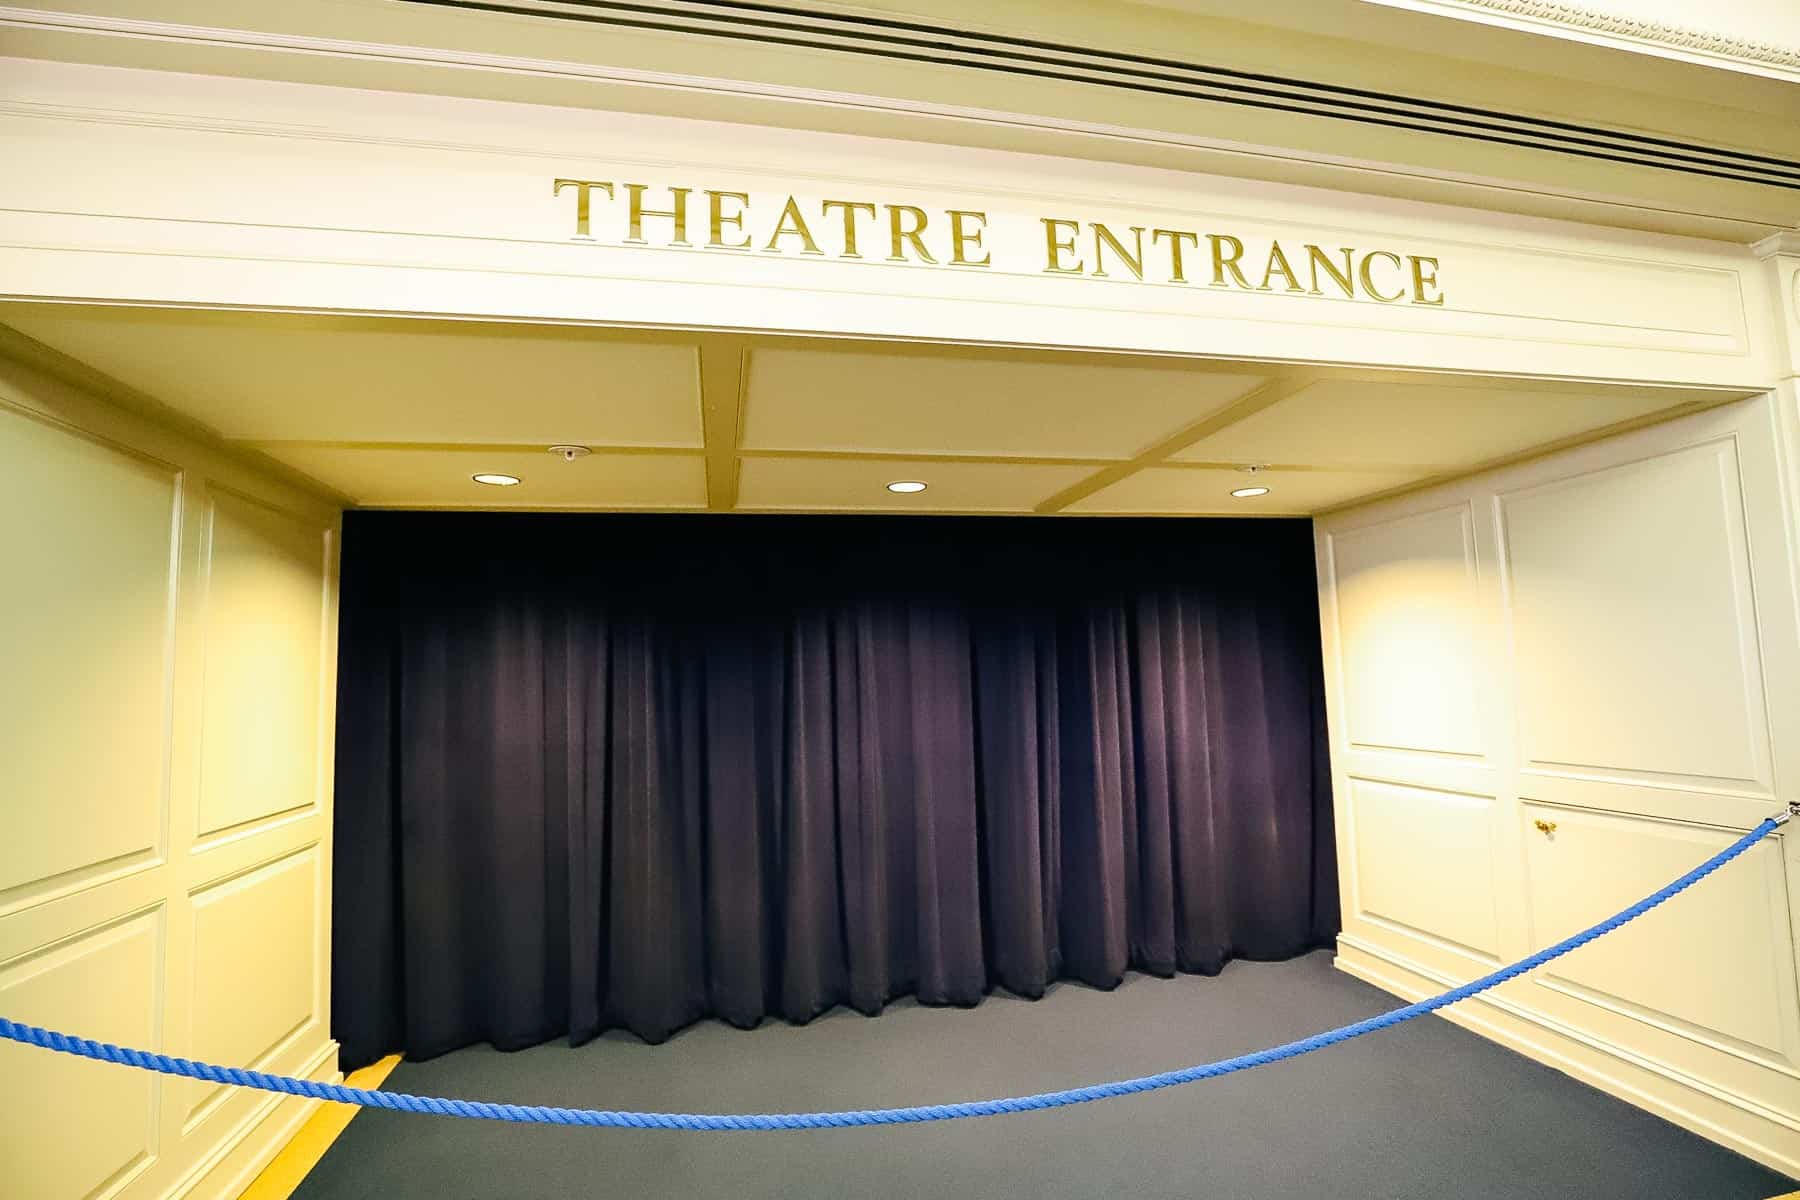 The theater entrance is roped off between shows. 